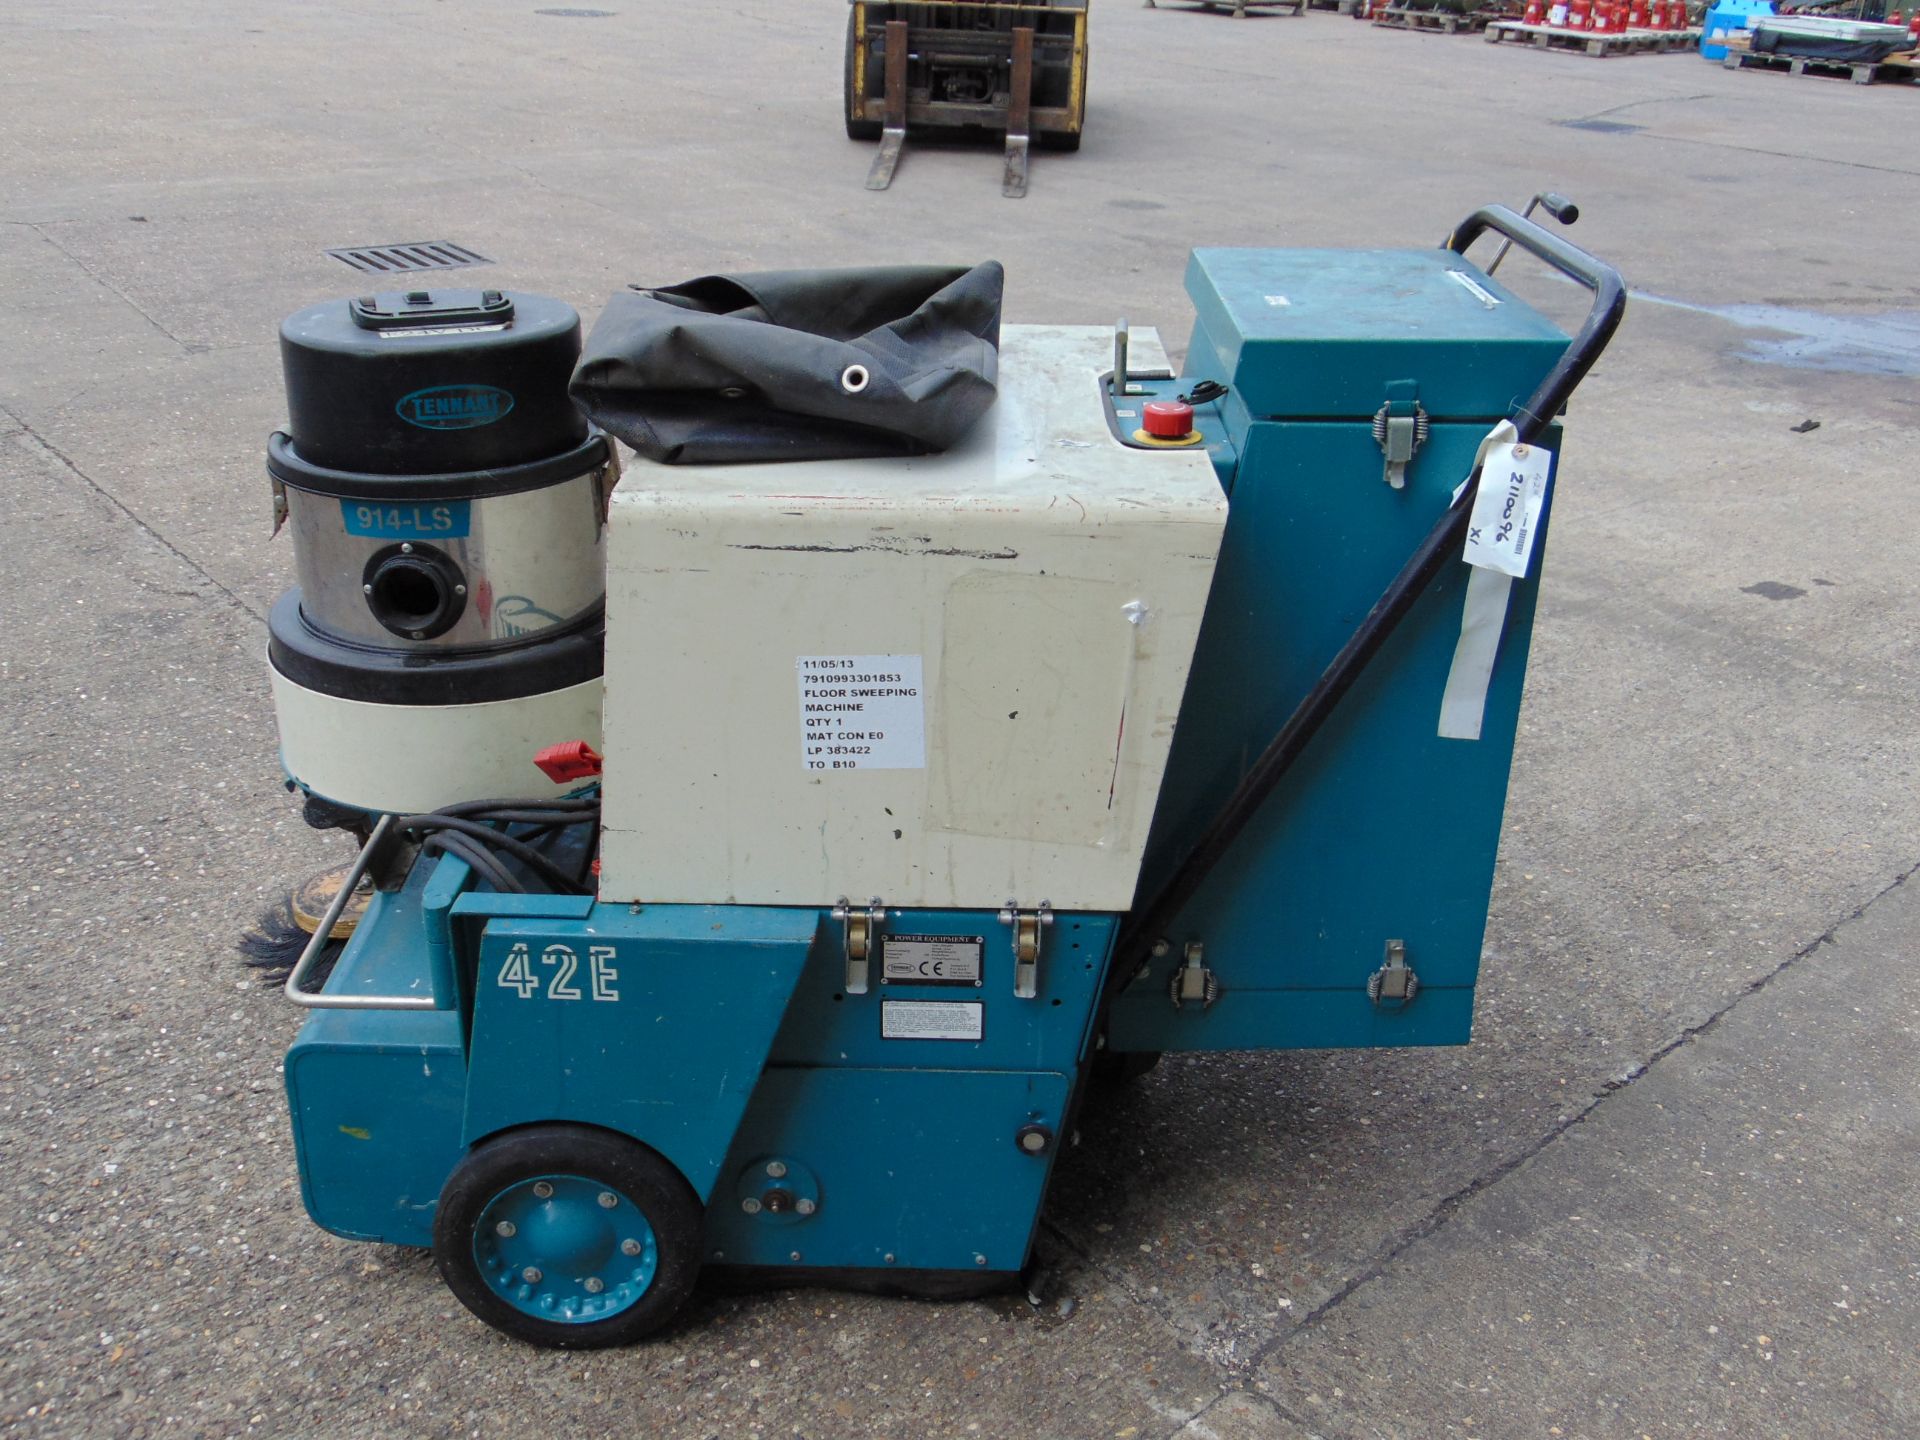 Tennant 42E Walk Behind Electric Sweeper - Image 4 of 14